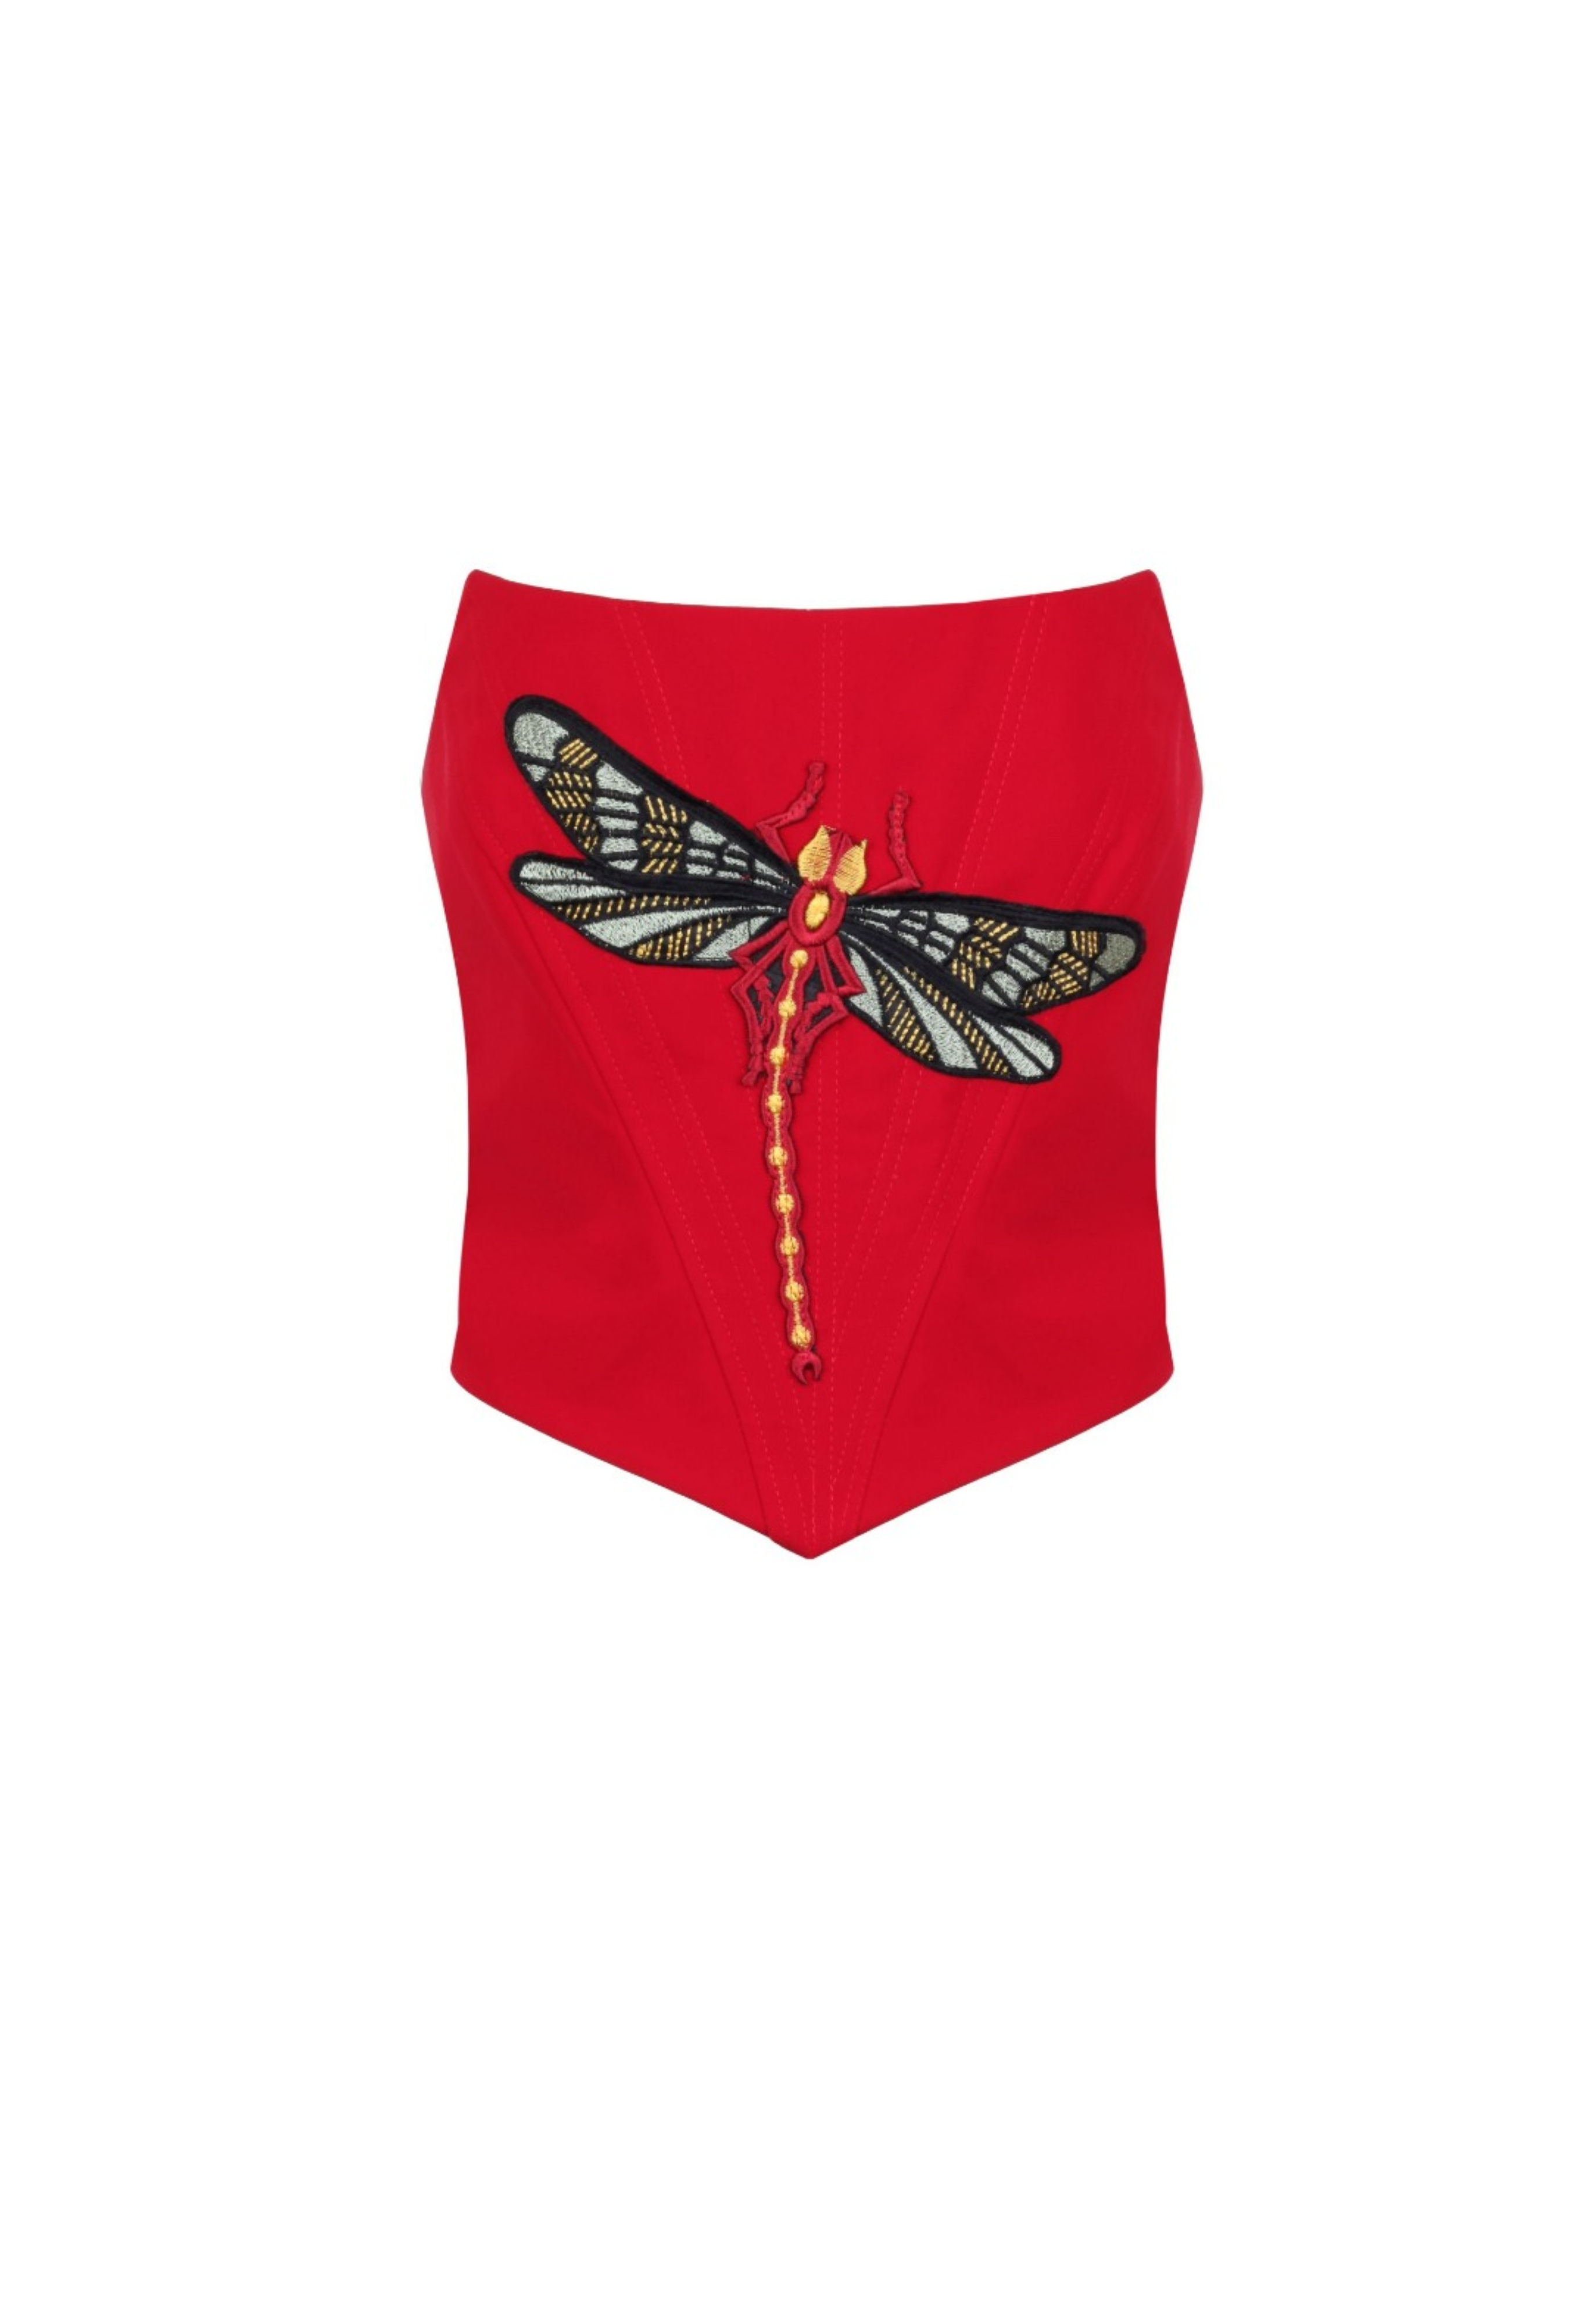 DRAGONFLY RED BUSTIER